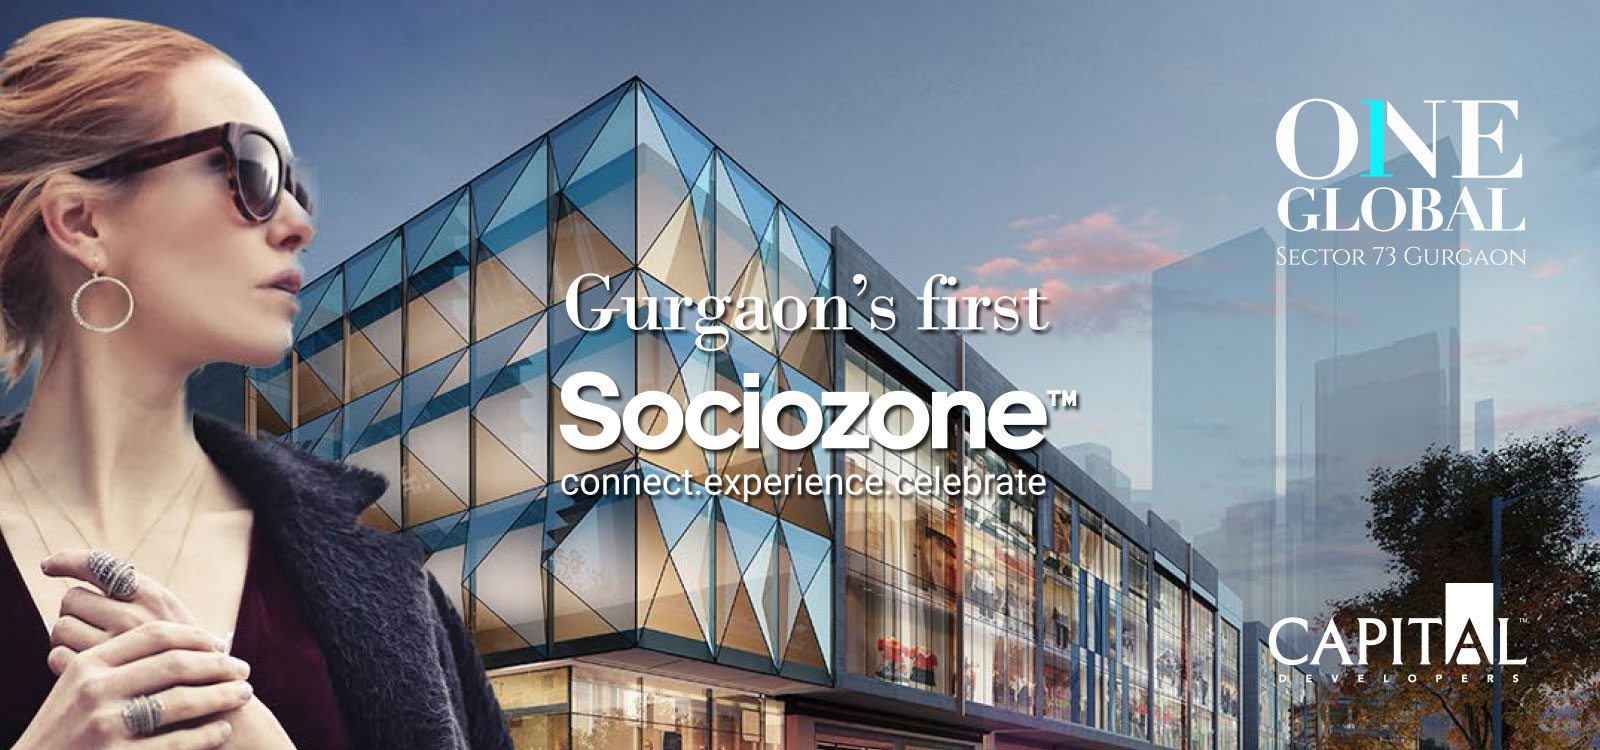 Capital One Global Sector 73 SCO Plans a New Business in Gurgaon